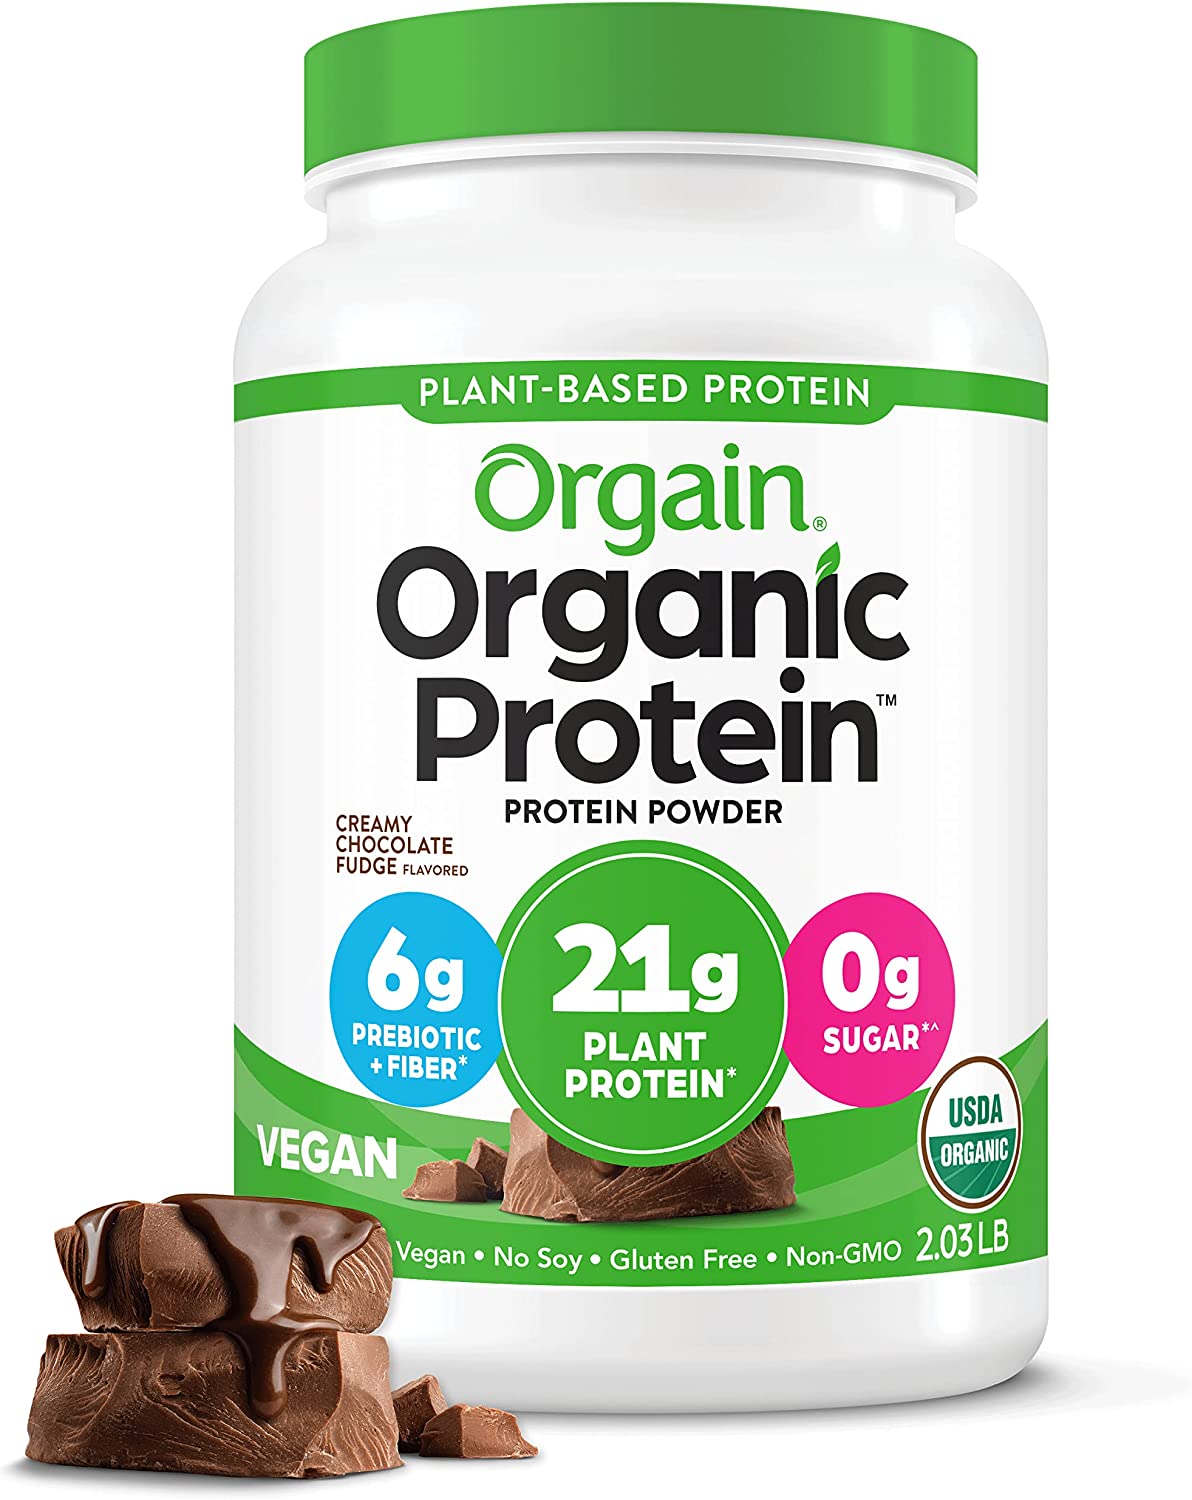 Orgain Organic Vegan Protein Powder, Creamy Chocolate Fudge – 21g of Plant Based Protein, Low Net Carbs, Non Dairy, Gluten Free, No Sugar Added, Soy Free, Kosher, Non-GMO, 2.03 Lb (Packaging May Vary)